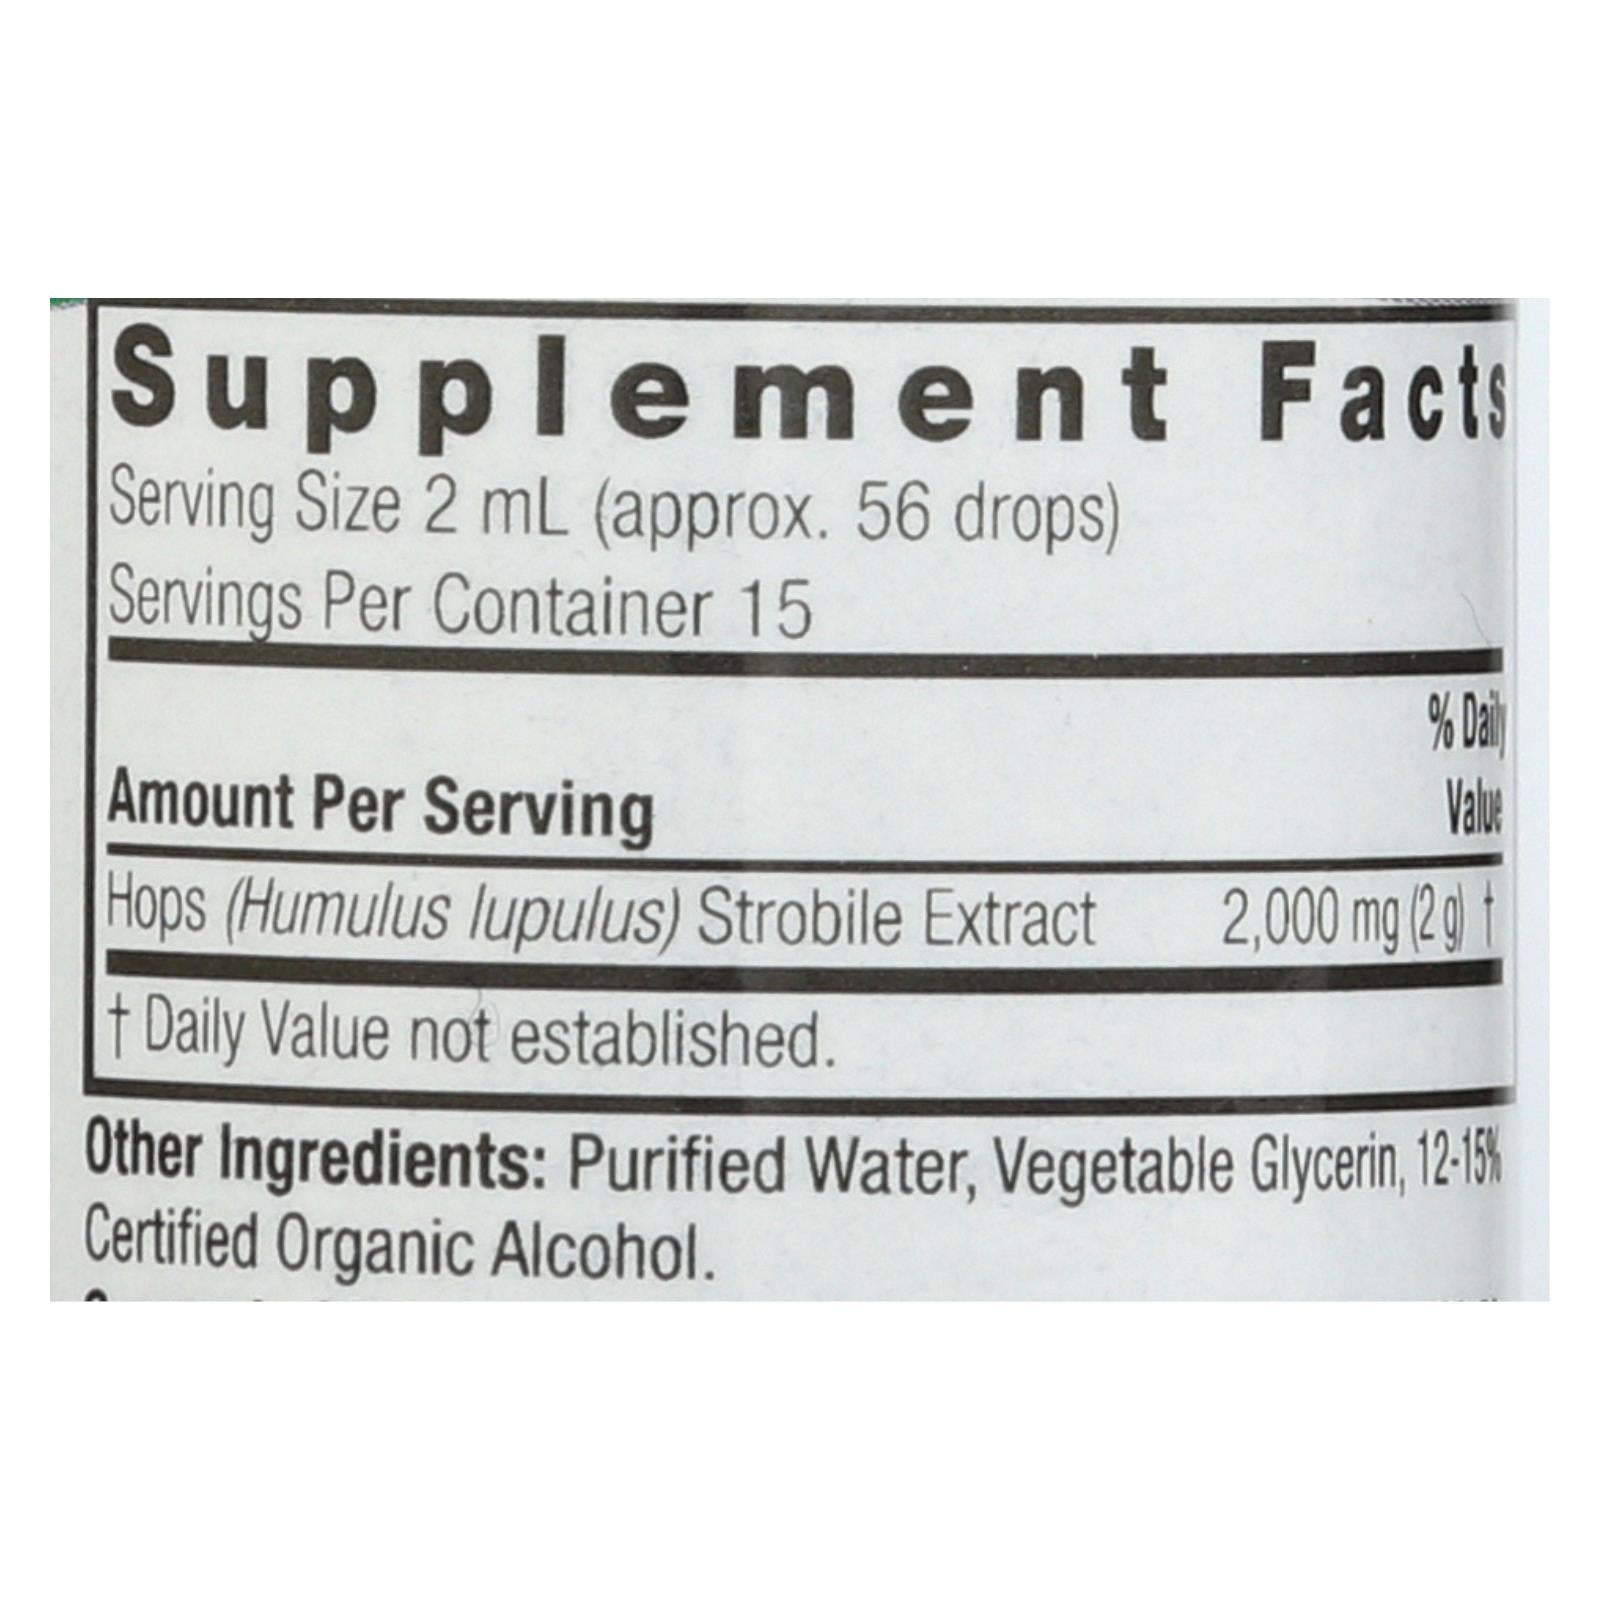 Nature's Answer - Hops Strobile Extract - 1 Fl Oz